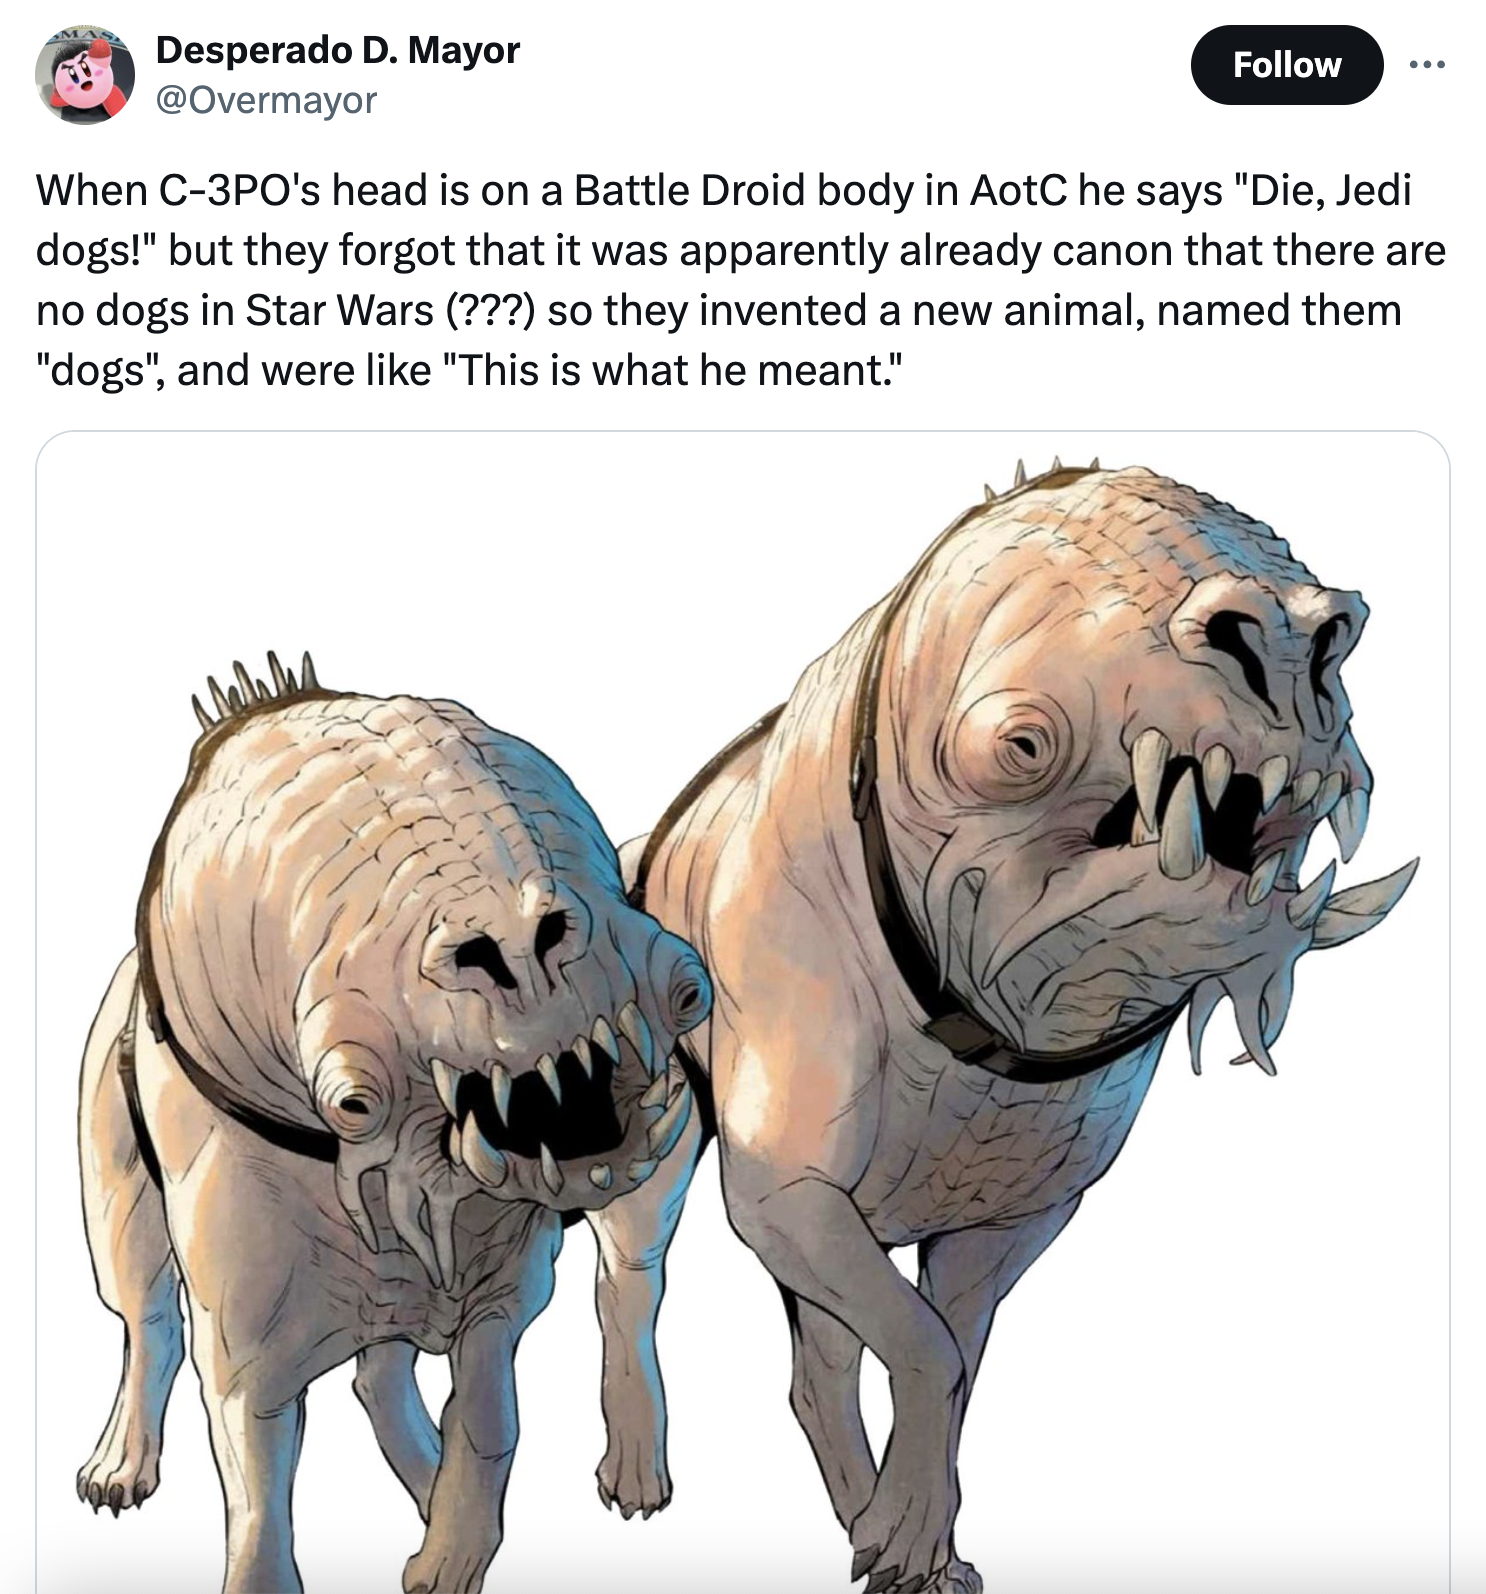 pug - Desperado D. Mayor When C3PO's head is on a Battle Droid body in AotC he says "Die, Jedi dogs!" but they forgot that it was apparently already canon that there are no dogs in Star Wars ??? so they invented a new animal, named them "dogs", and were "